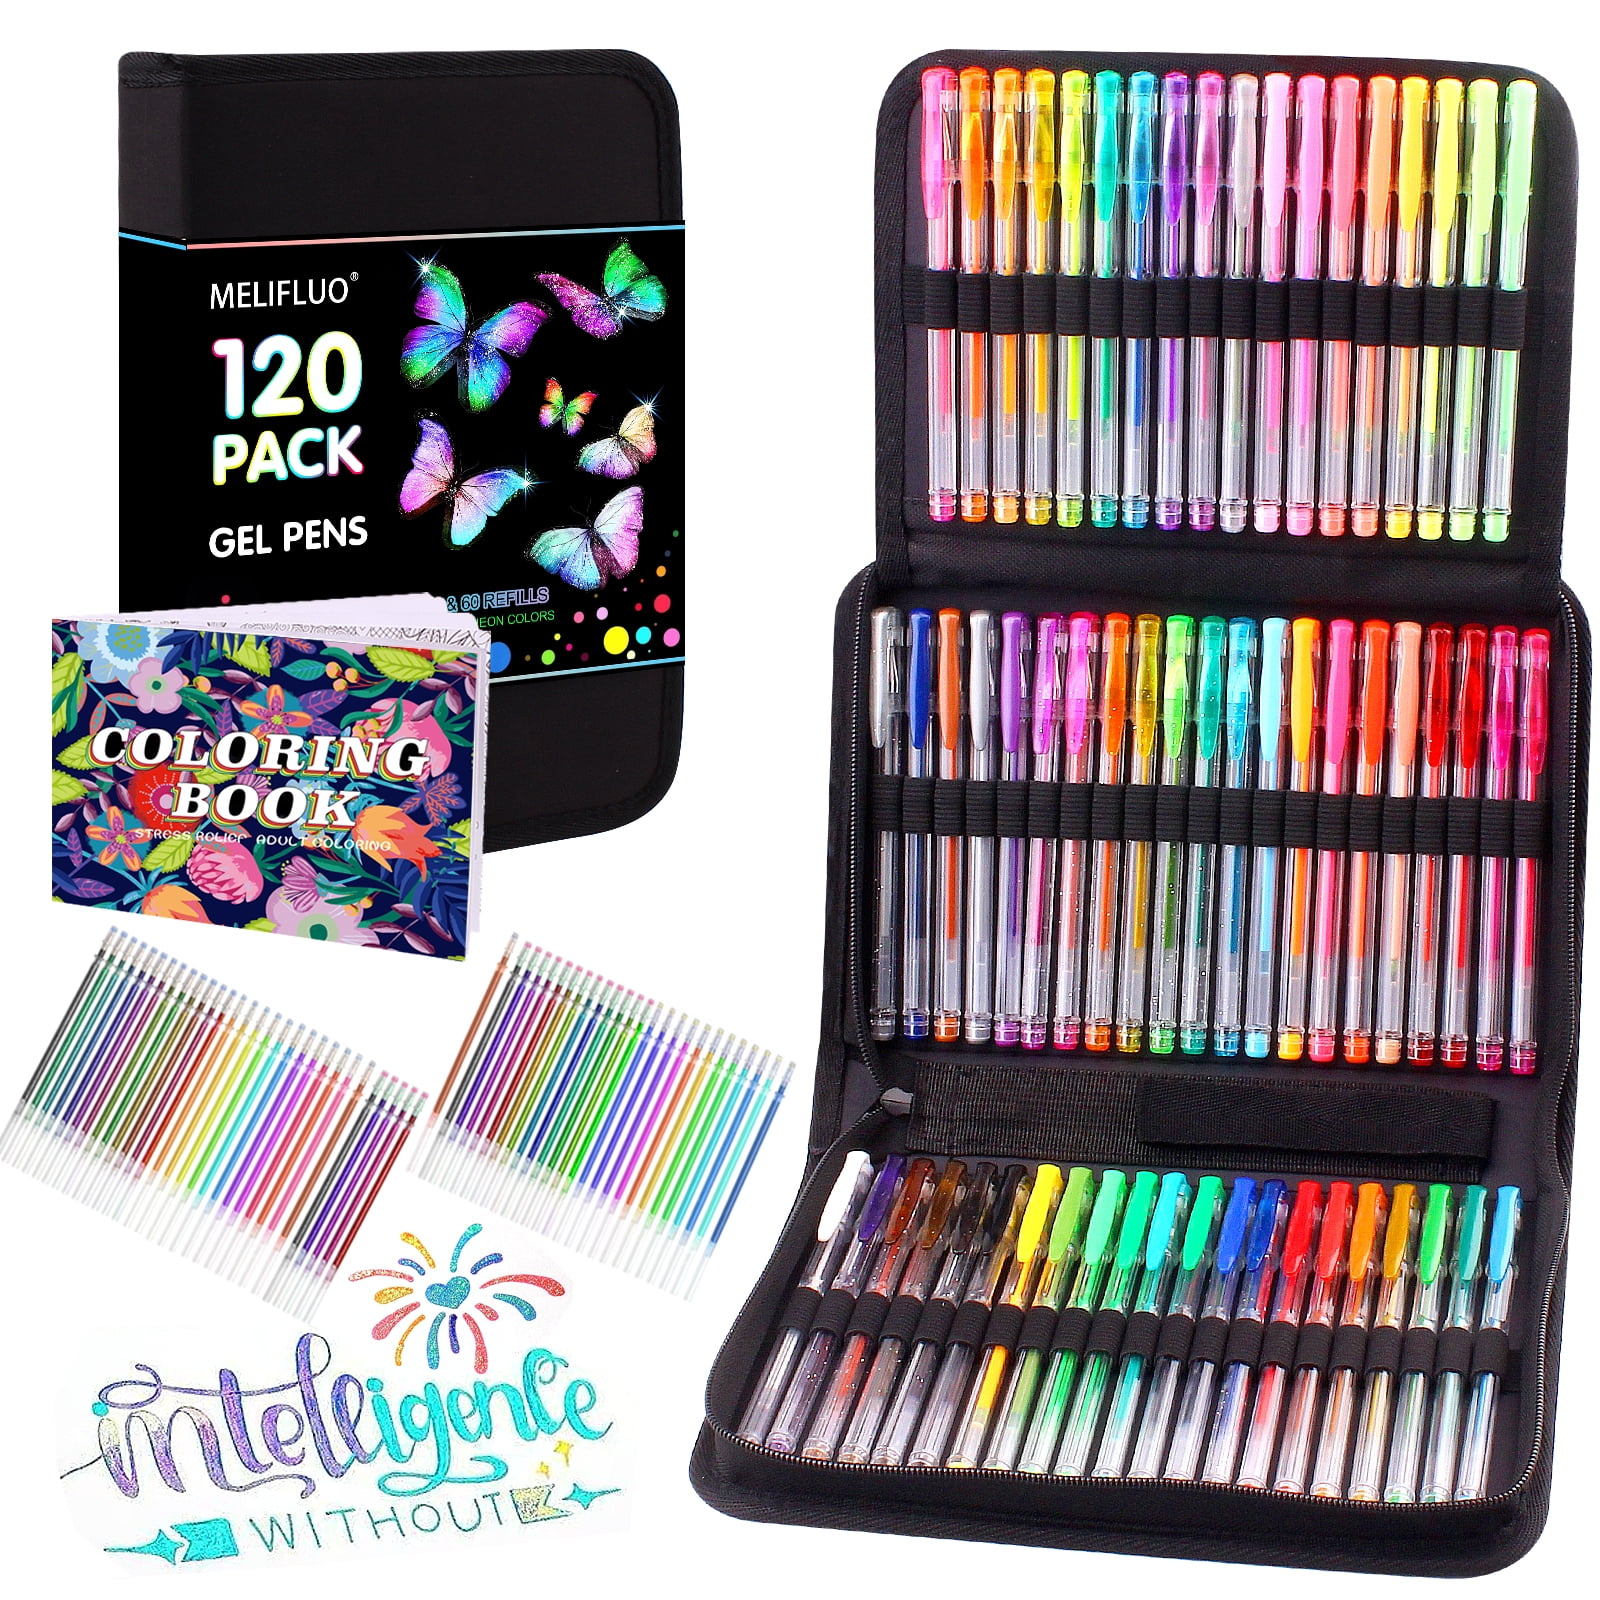 Gel Pens Set for Adult Coloring Books, 160Pcs 80 Gel Pens and 80 Refills  with Tr